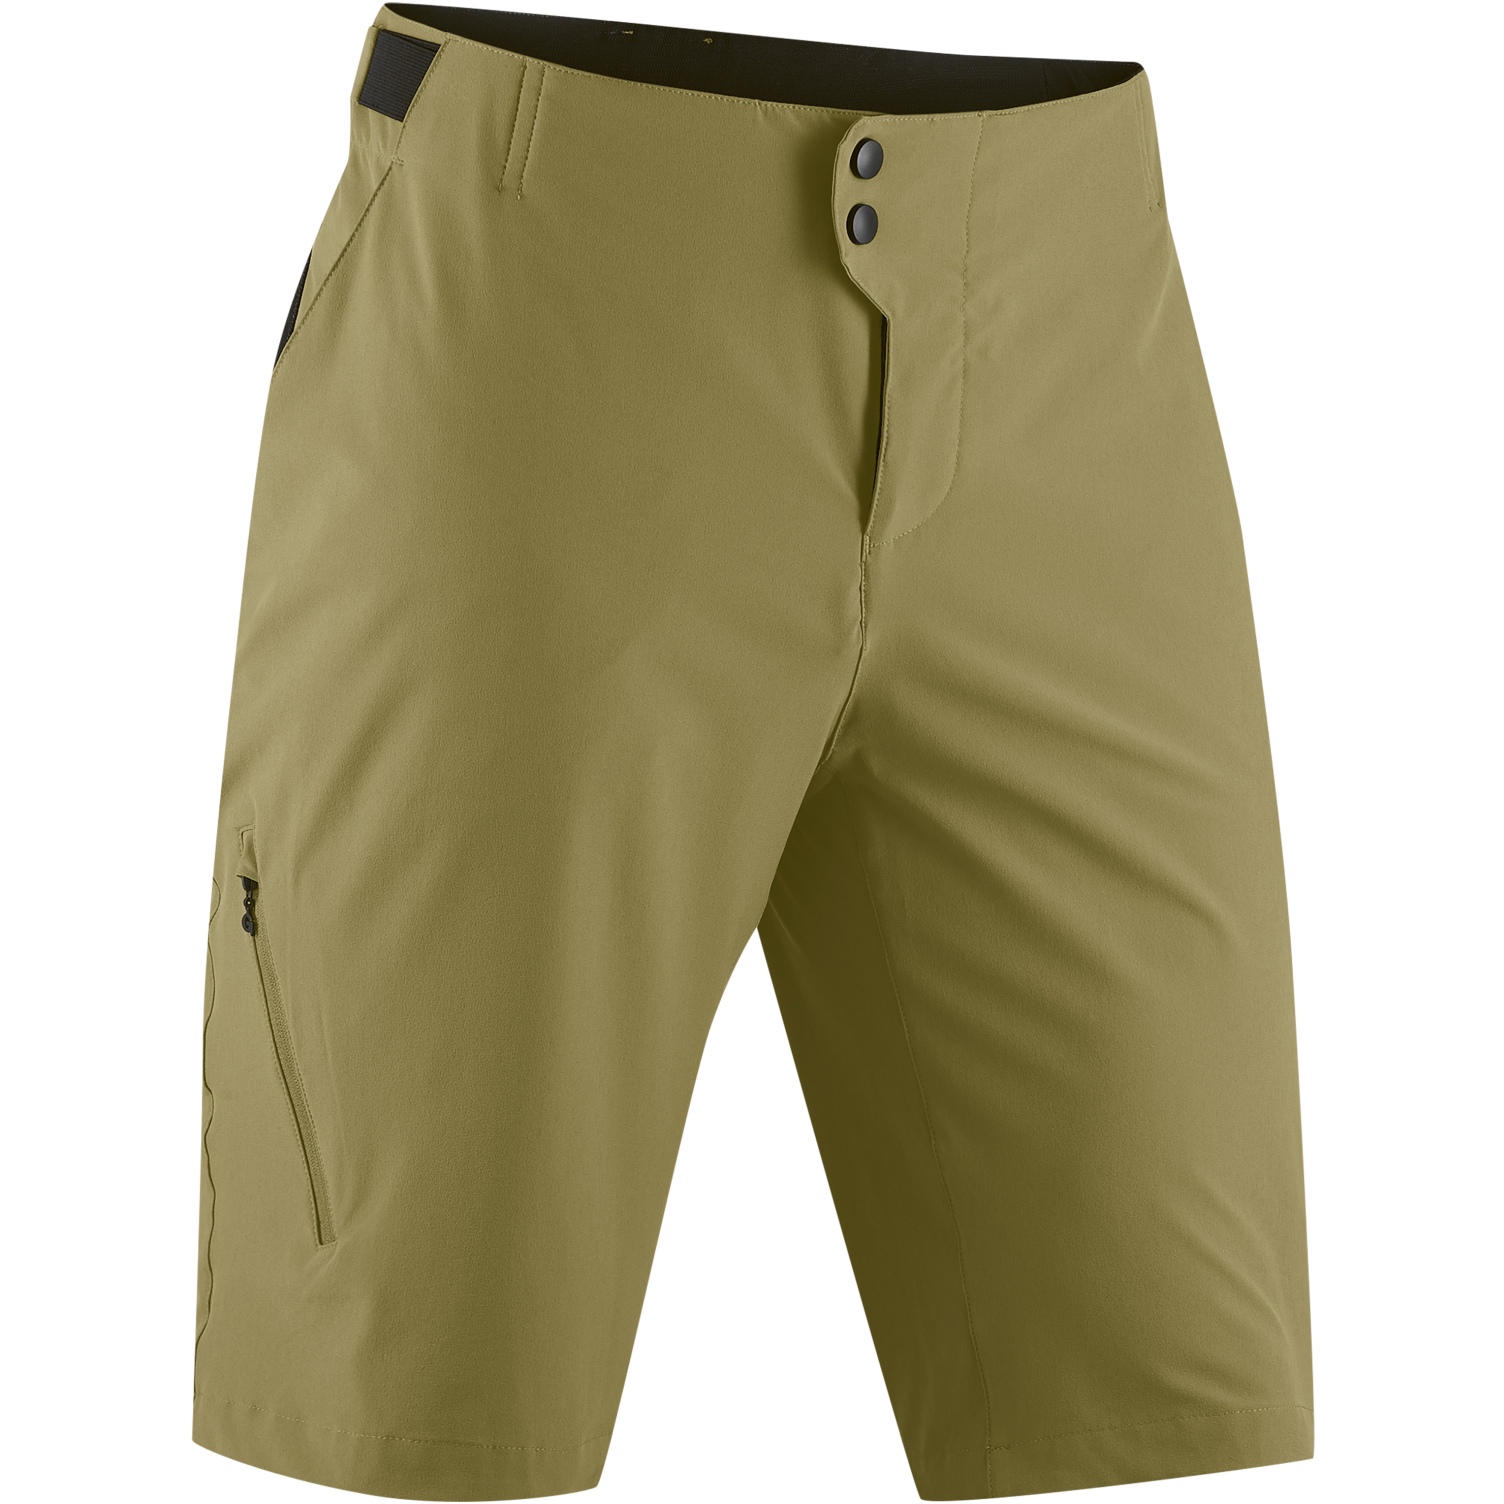 Picture of Gonso Fumero Bike Shorts Men - Dusty Countryside